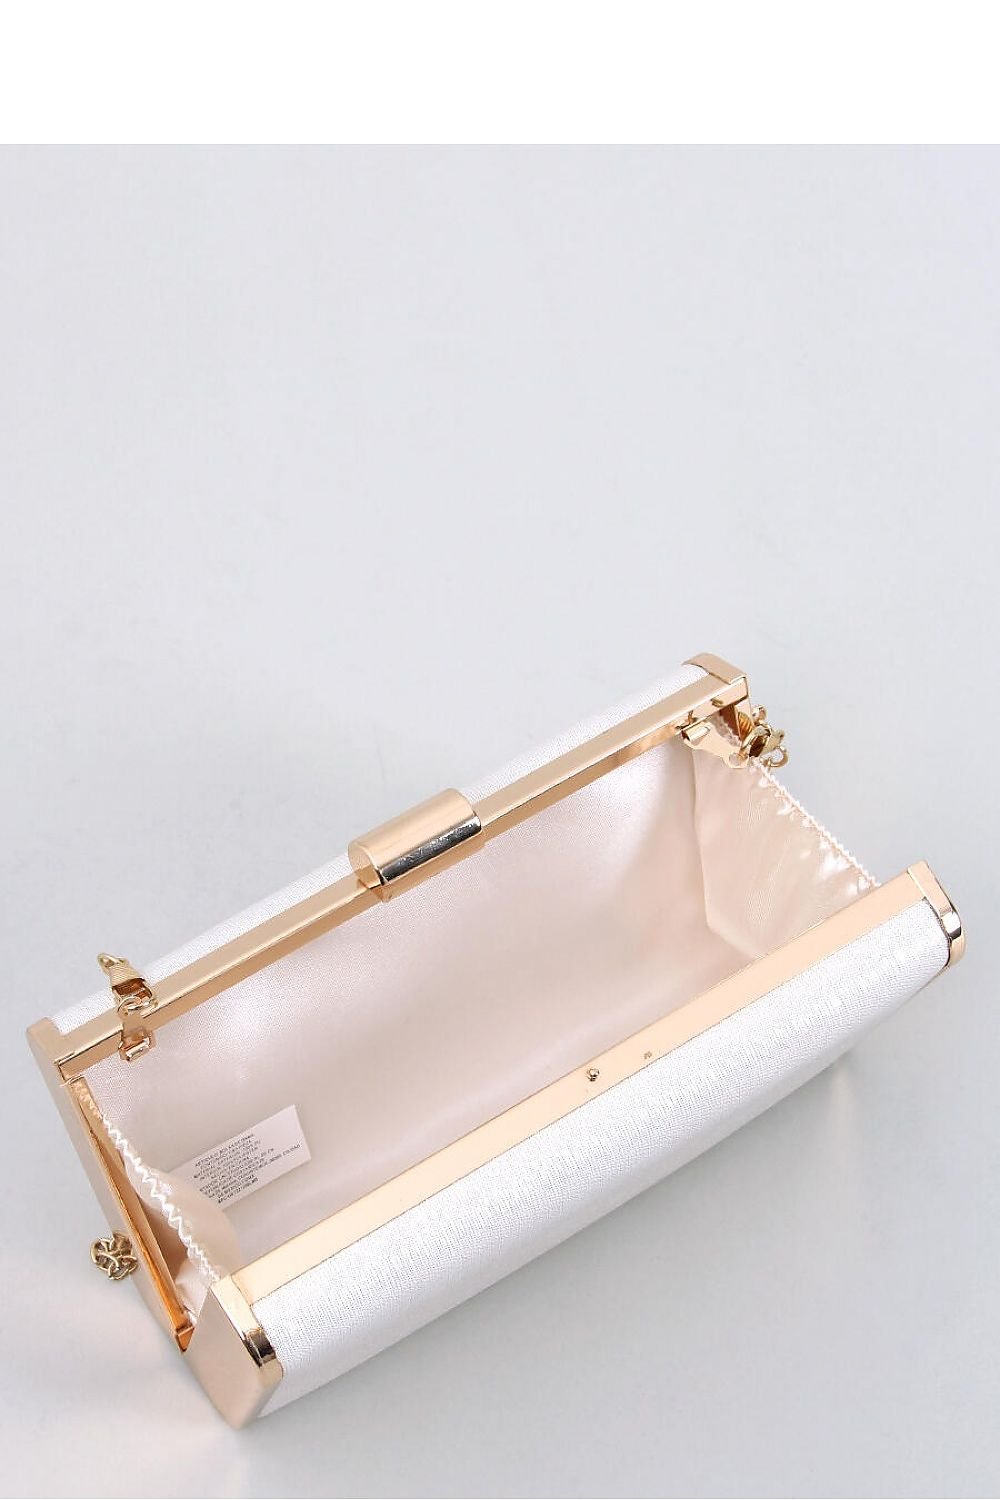 Envelope clutch bag - M&H FashionEnvelope clutch bagM&H FashionM&H Fashion189617_1103875one-size-fits-allEnvelope clutch bag InelloM&H FashionM&H FashionVisitor clutch bag for women with a tassel. This unique model with an iridescent finish is sure to catch the eye.... The handbag can be carried in hand or on a delicEnvelope clutch bag